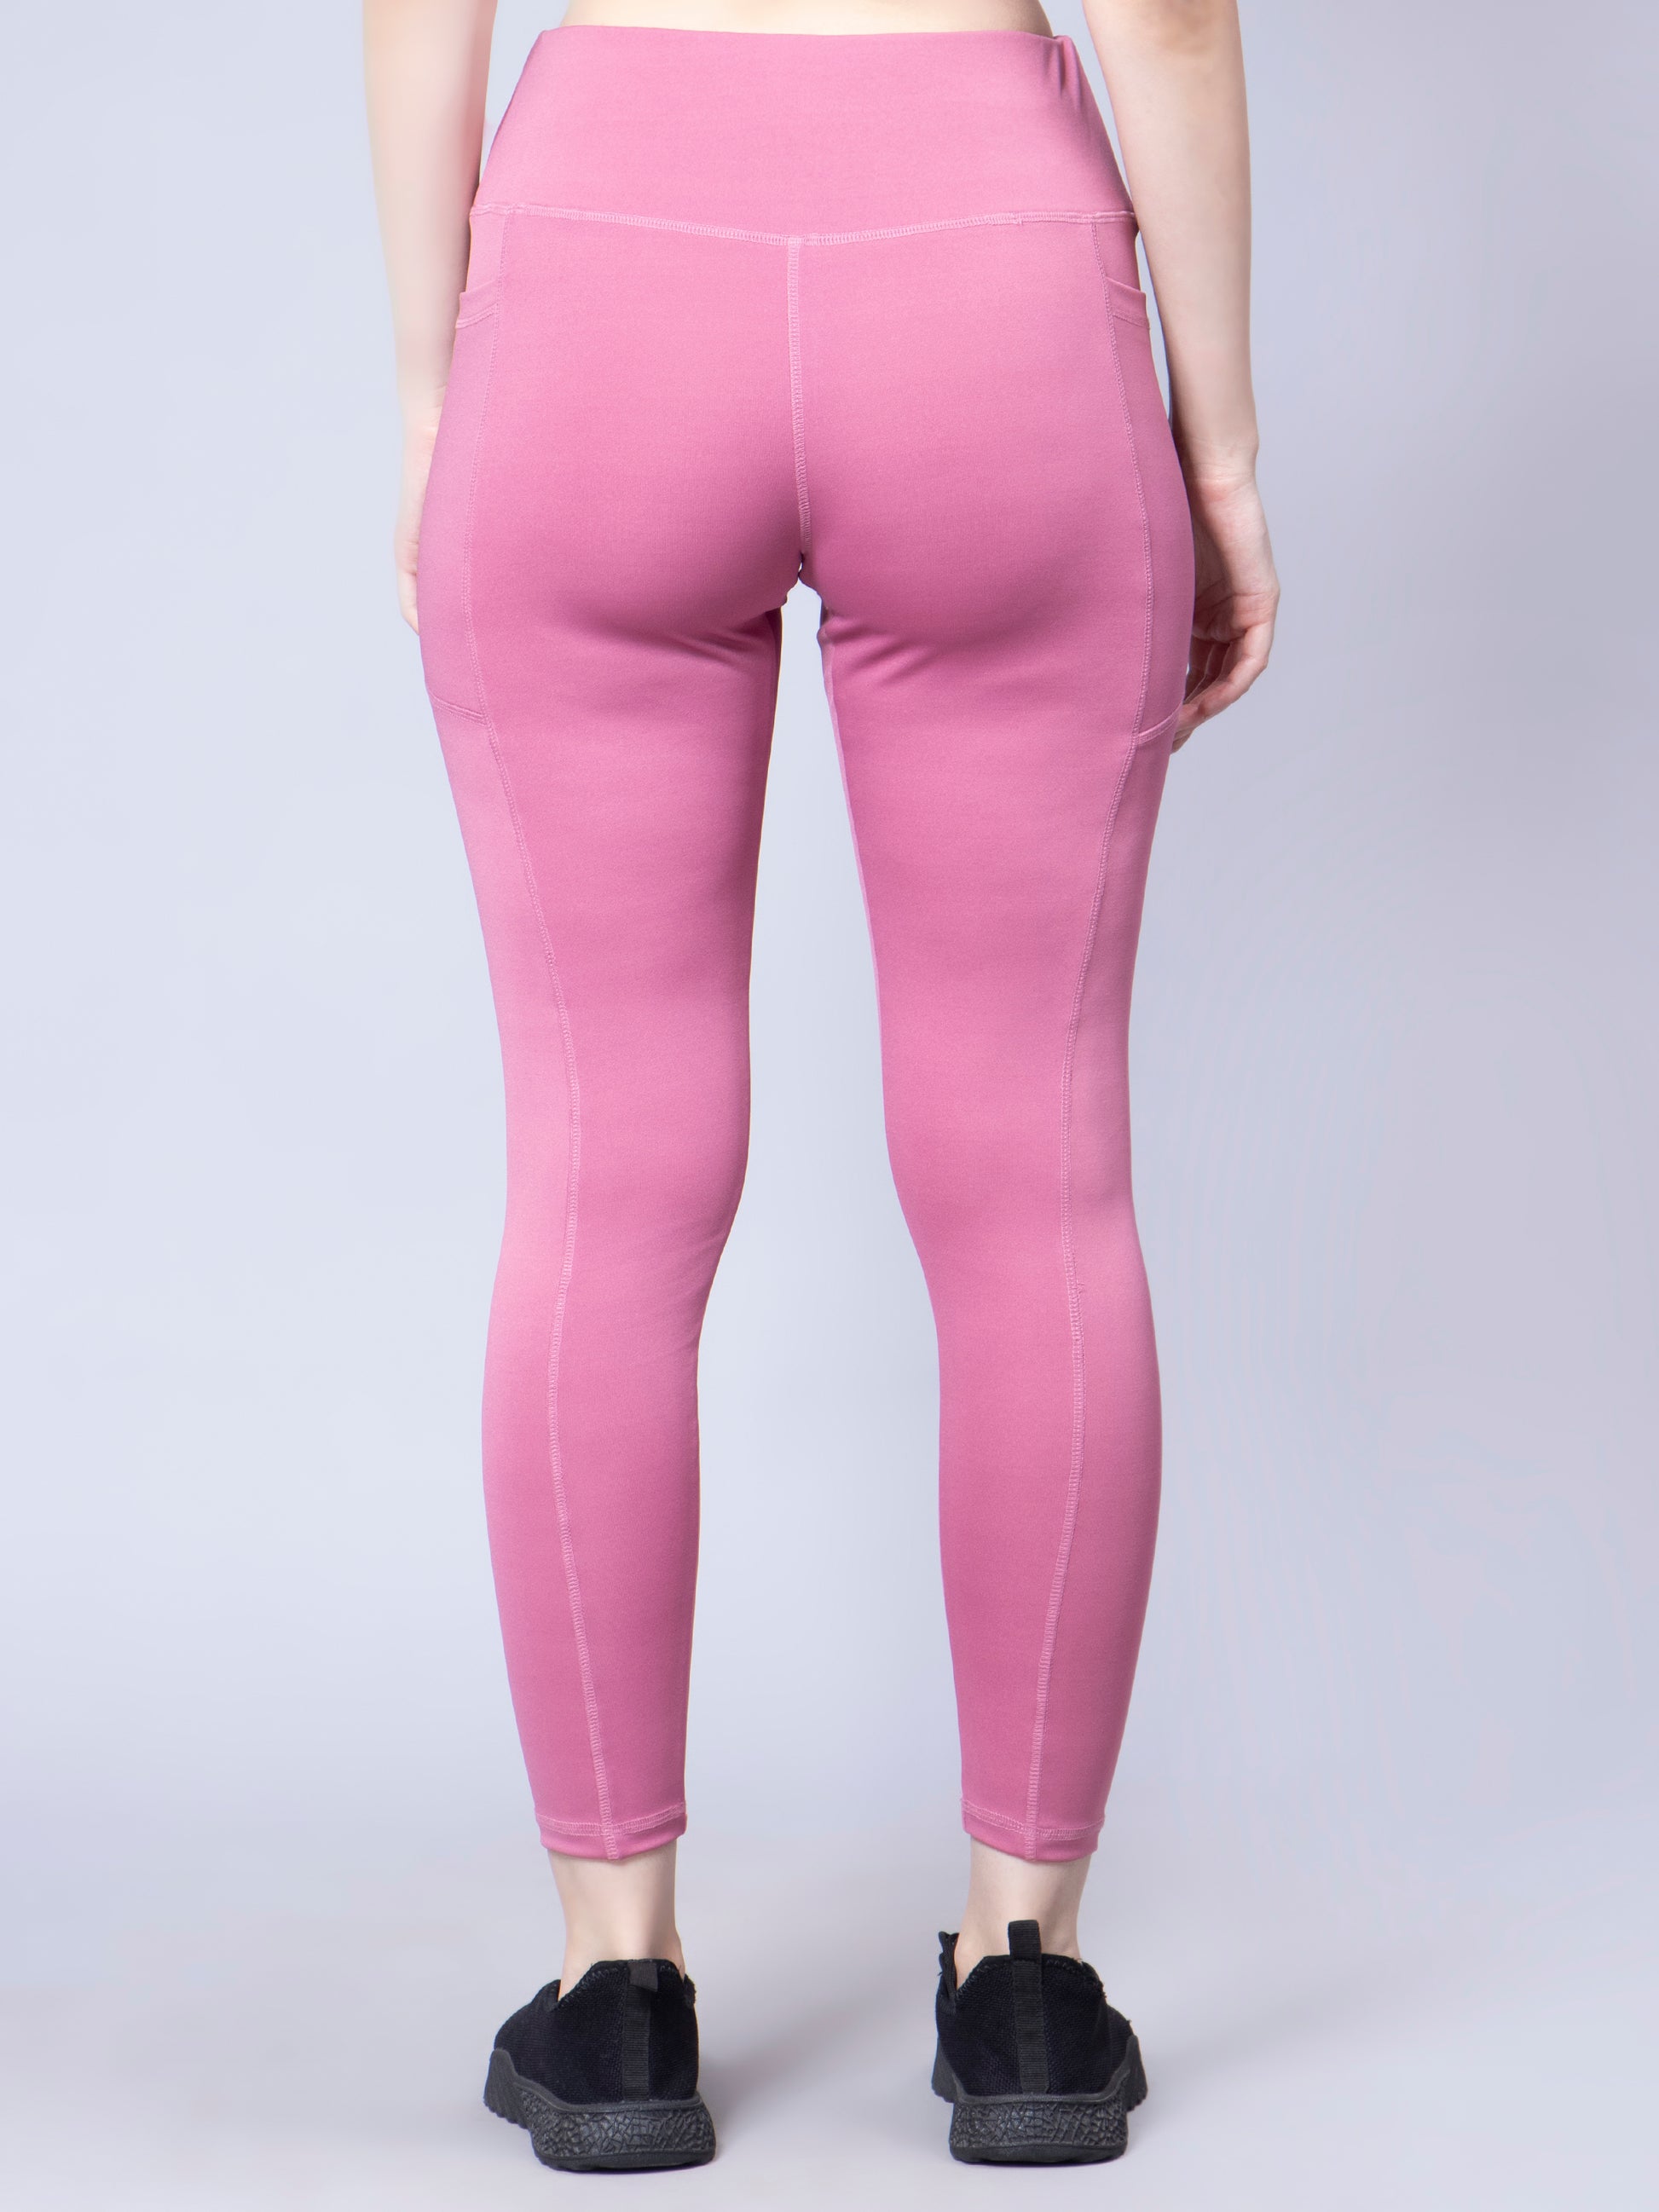 The Ultimate Solid High Waist Gym, Yoga Tights and leggings - Pink